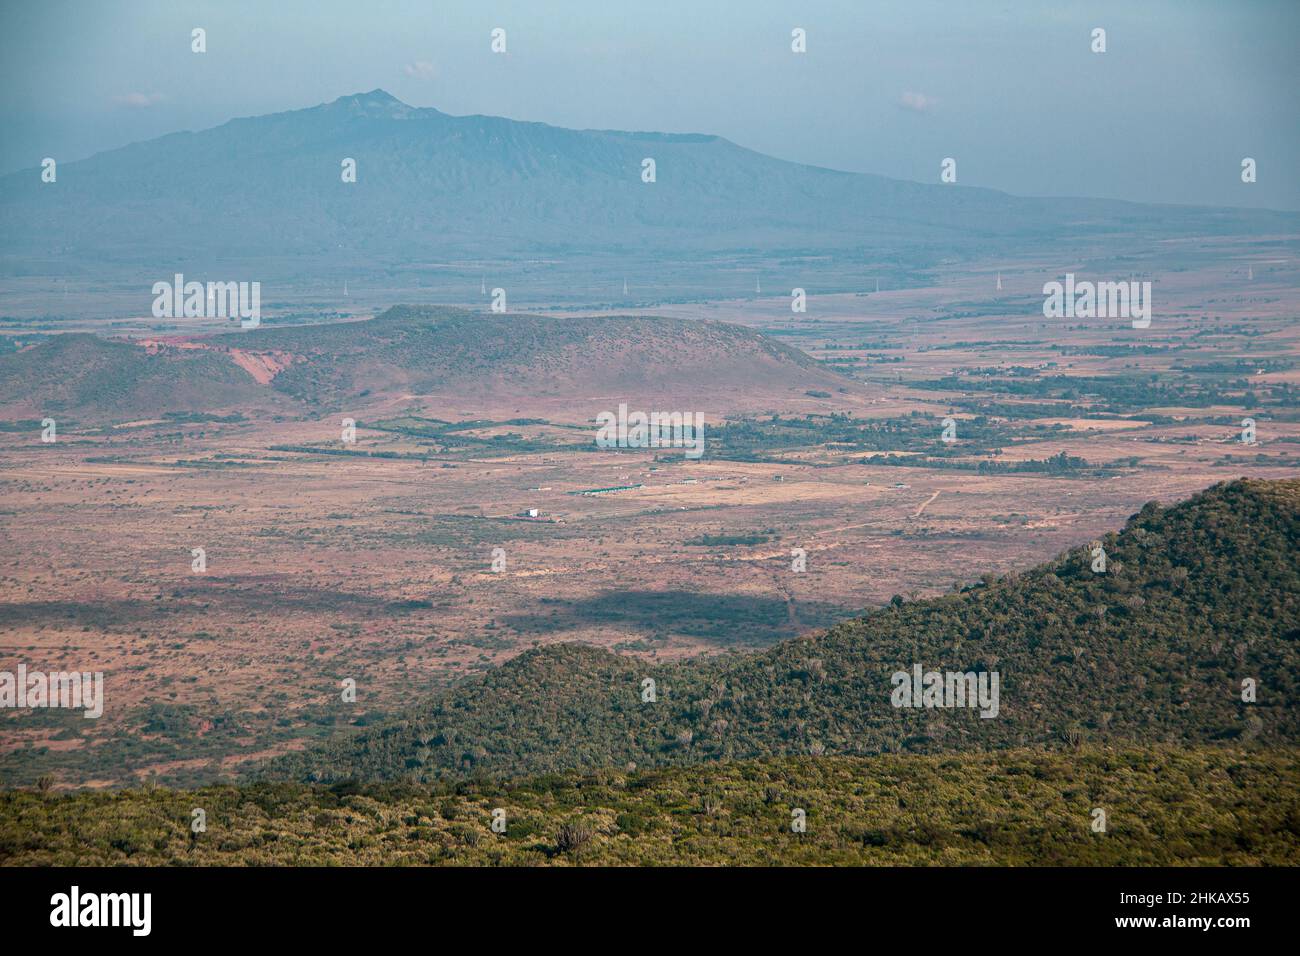 Fantastic view of the Greater Rift Valley, Kenya, with Mount Longonot in the background Stock Photo